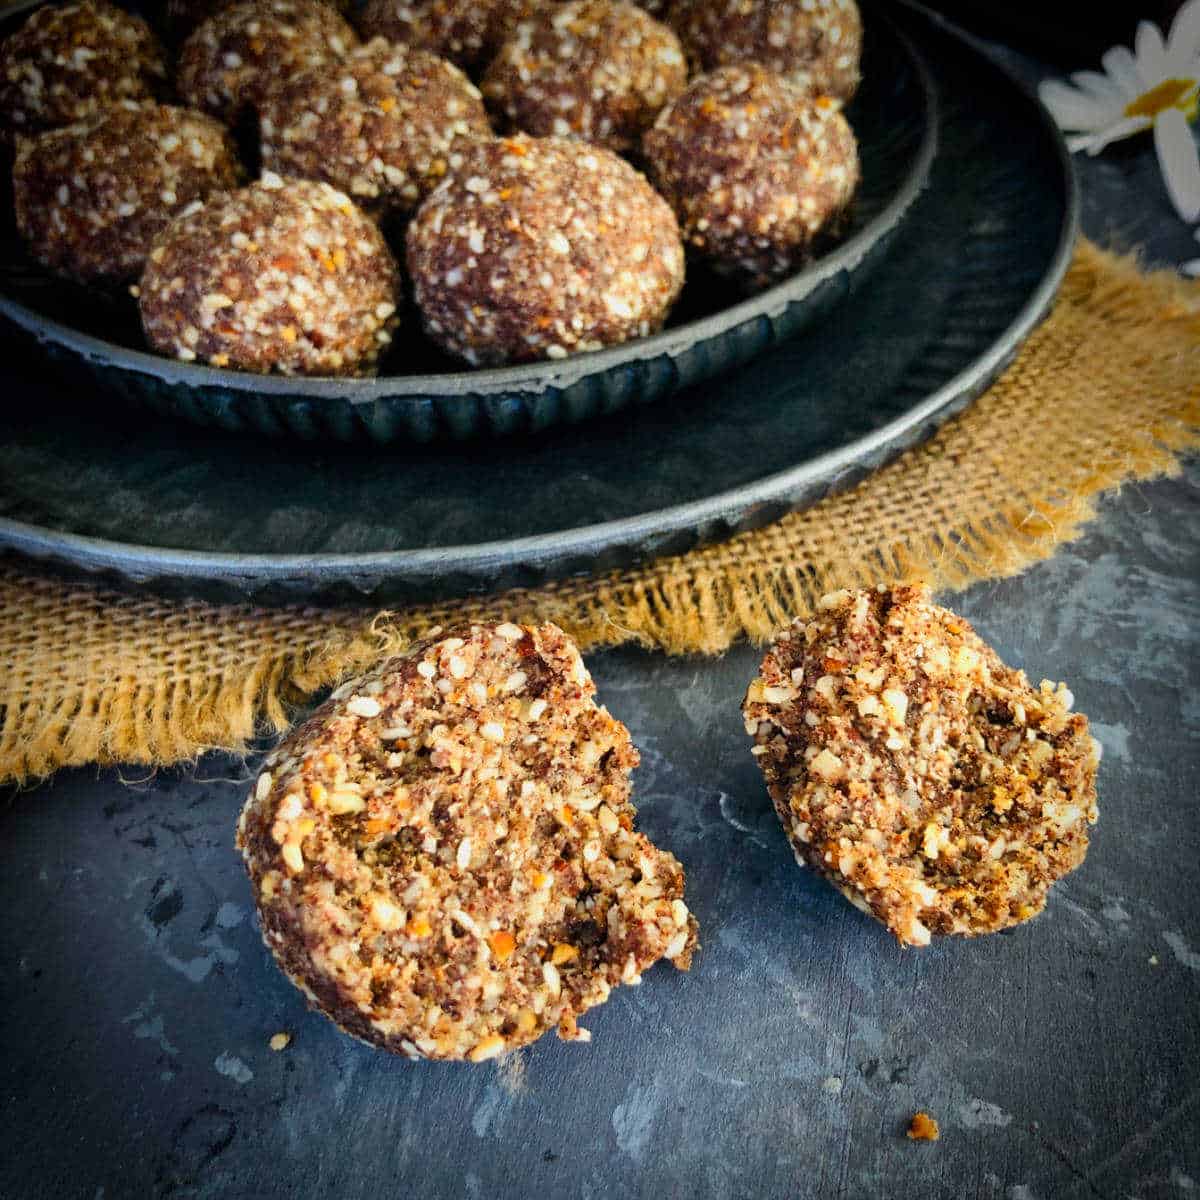 Ragi laddu cut into 2 pieces to show the texture.